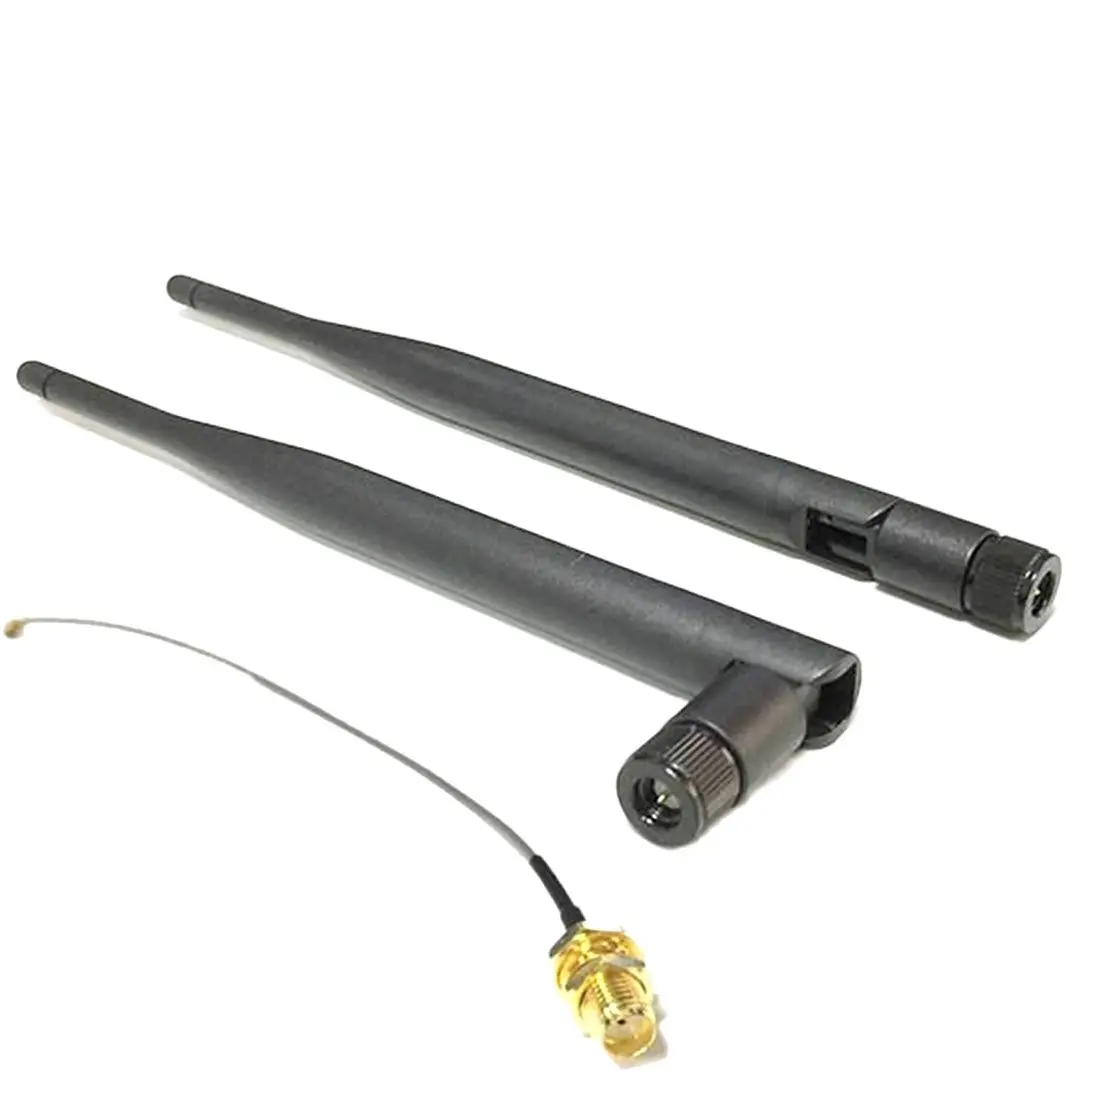 

WIFI Antenna 2.4 GHz 6dBi SMA Male Wireless WLAN Black Aerial 195mm Long + IPX / u.fl To SMA Female Pigtail Cable 15cm